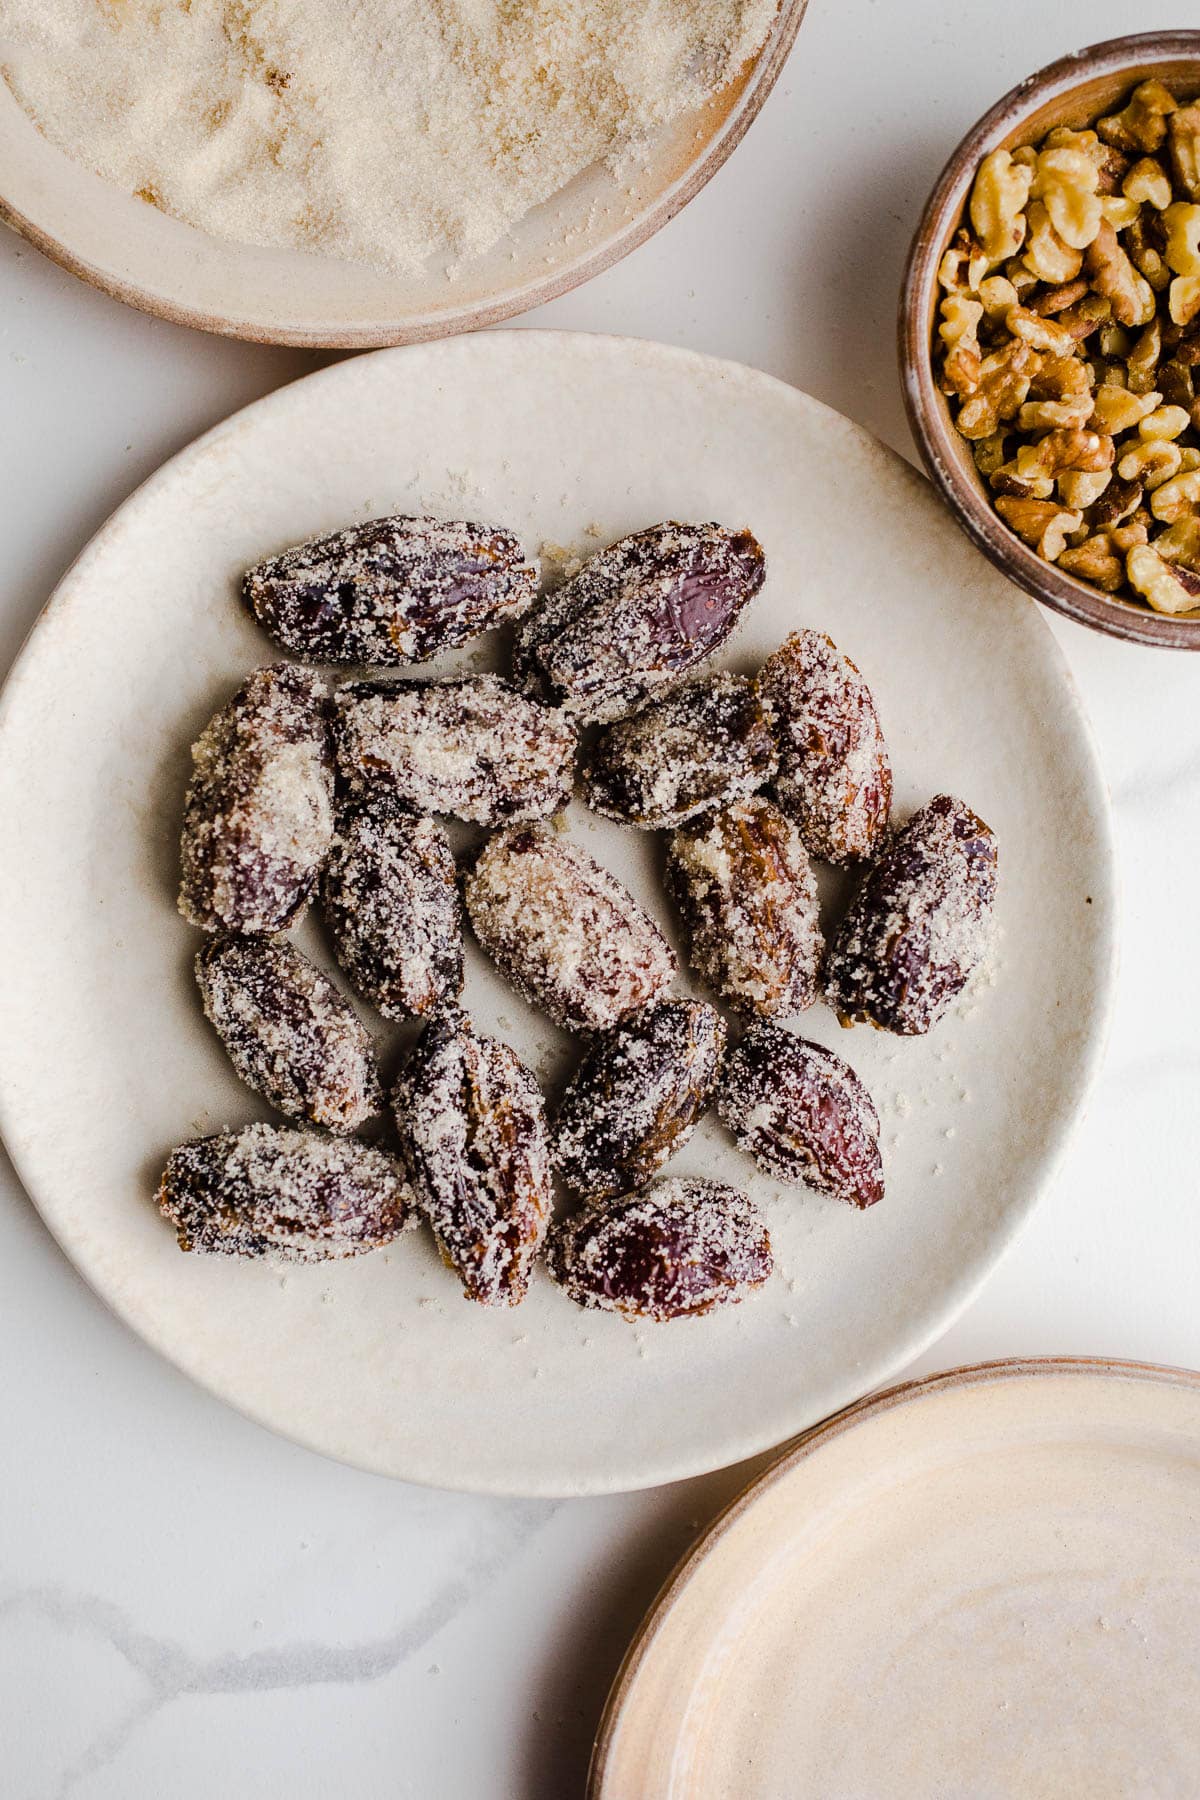 Sugared Dates on a plate next to a small bowl of walnuts.